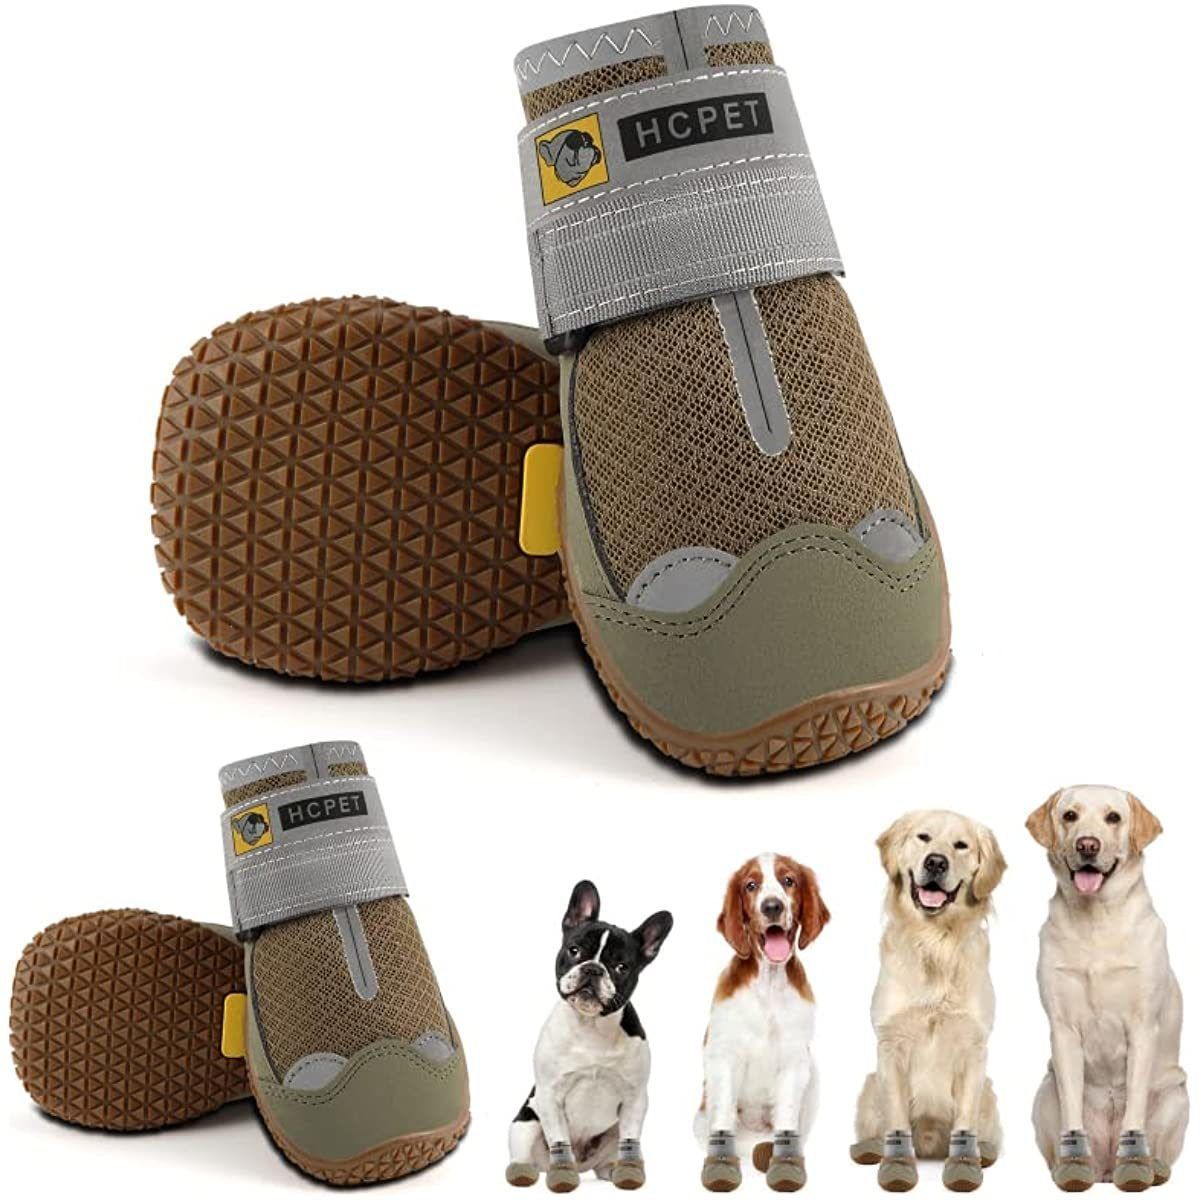 The intense summer sun can heat up the pavement, making it uncomfortable for your dog's paws. Keep their feet safe and cool with these high-quality dog boots. 

anytimewags.com/products/view/… 

#dogproducts #dogsofinstagram #dogs #dog #doglovers #dogaccessories #petproducts #doglover